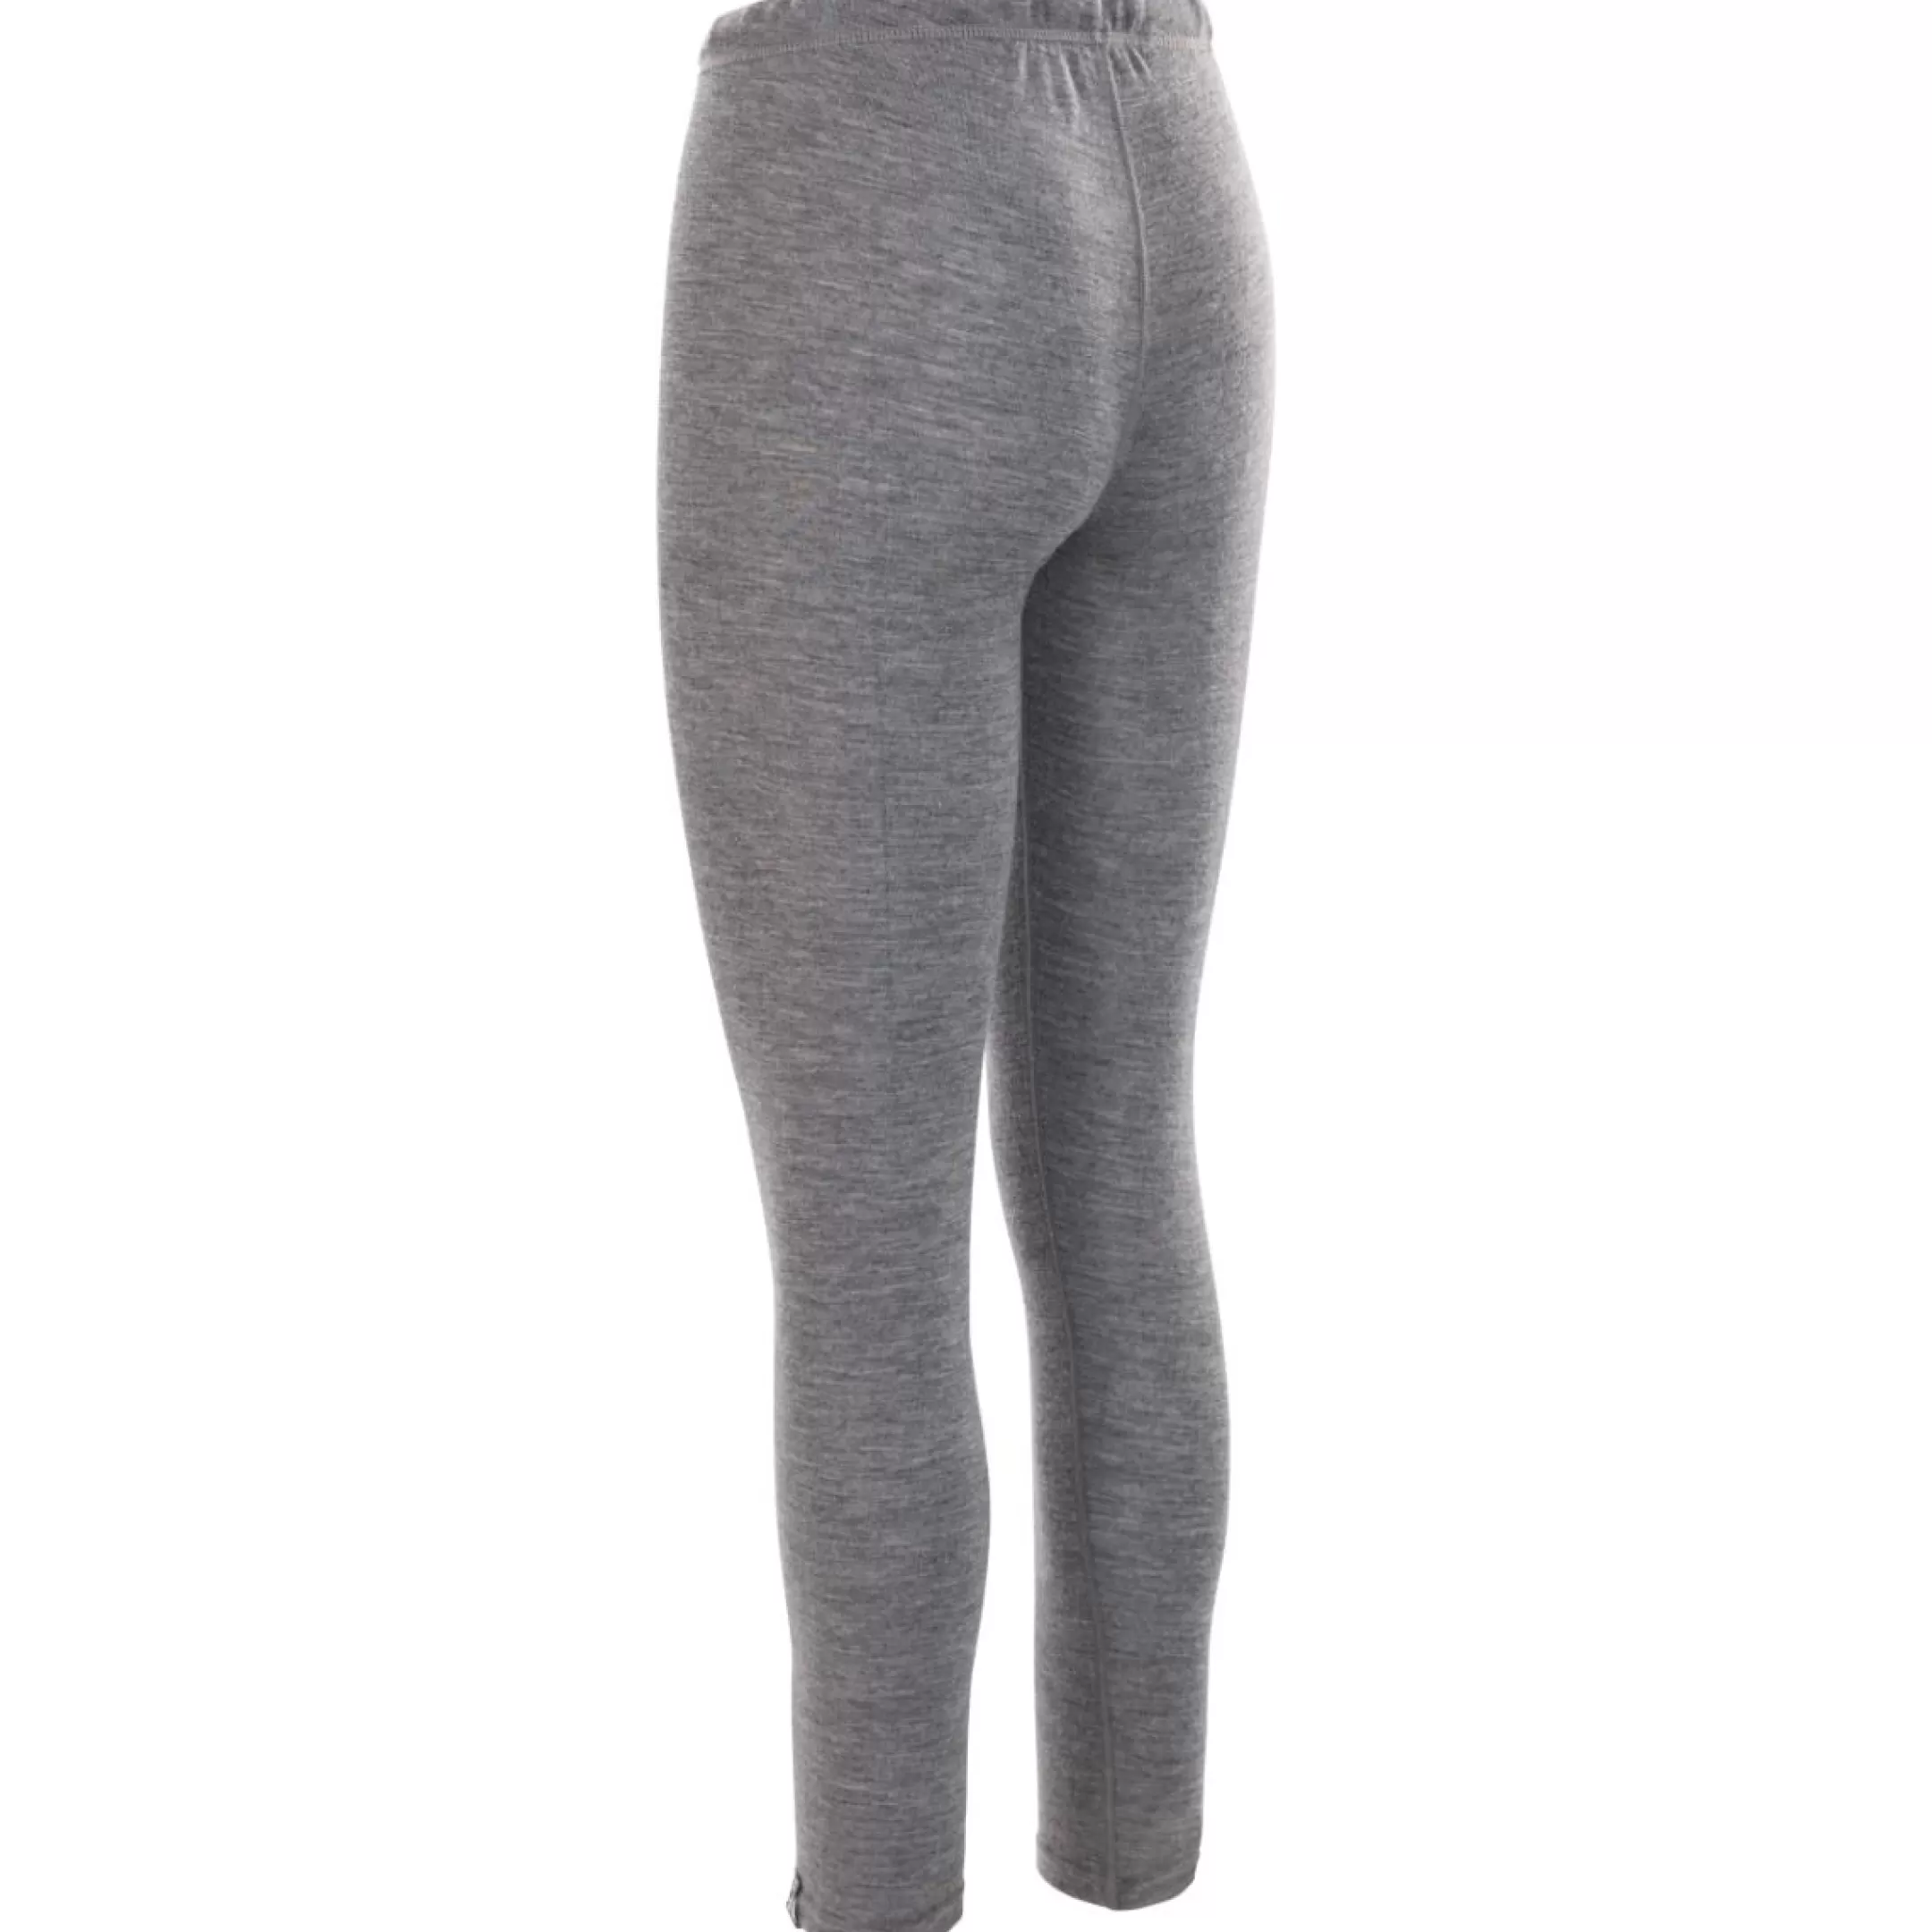 DLX Women's Thermal Trousers Chara | Trespass Online